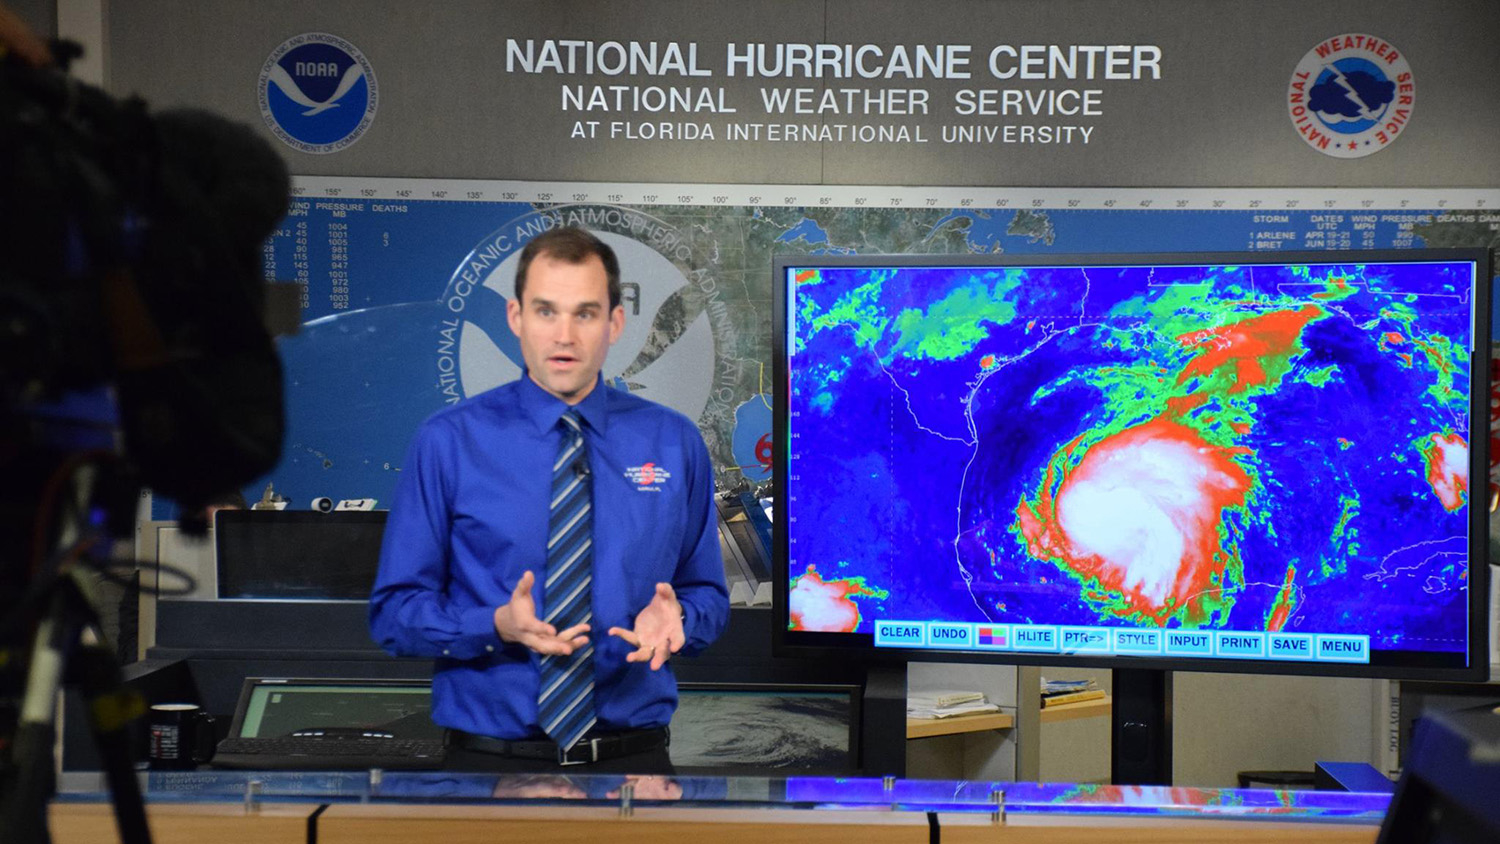 Michael Brennan stands next to a satellite image of a hurricane on a screen in the National Hurricane Center